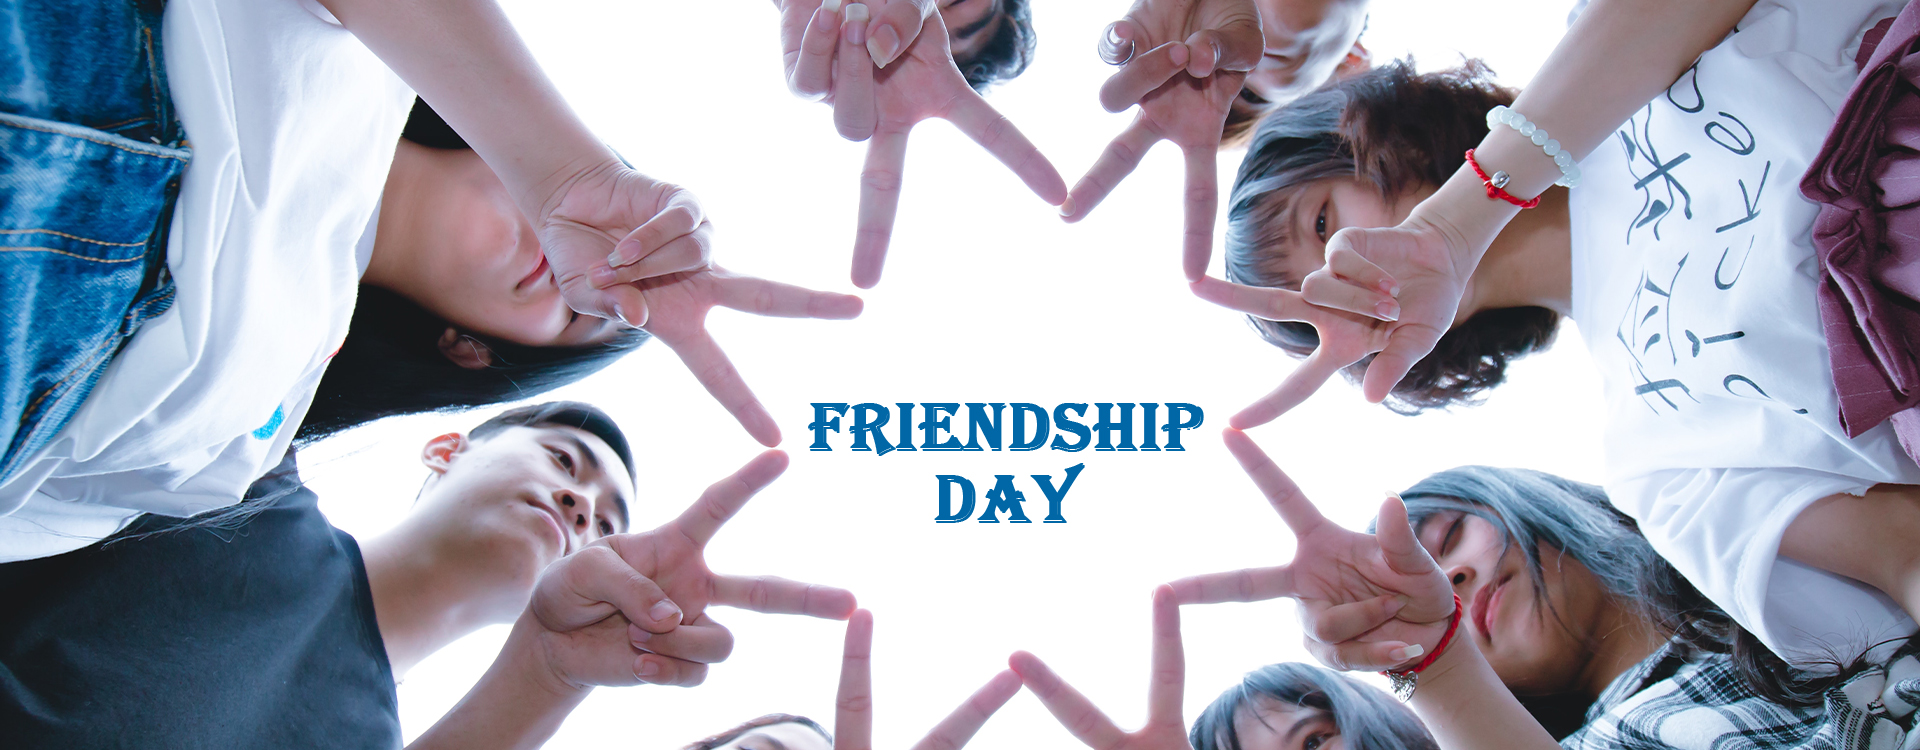 friendship day select a meaningful friends gifts to express your love and care